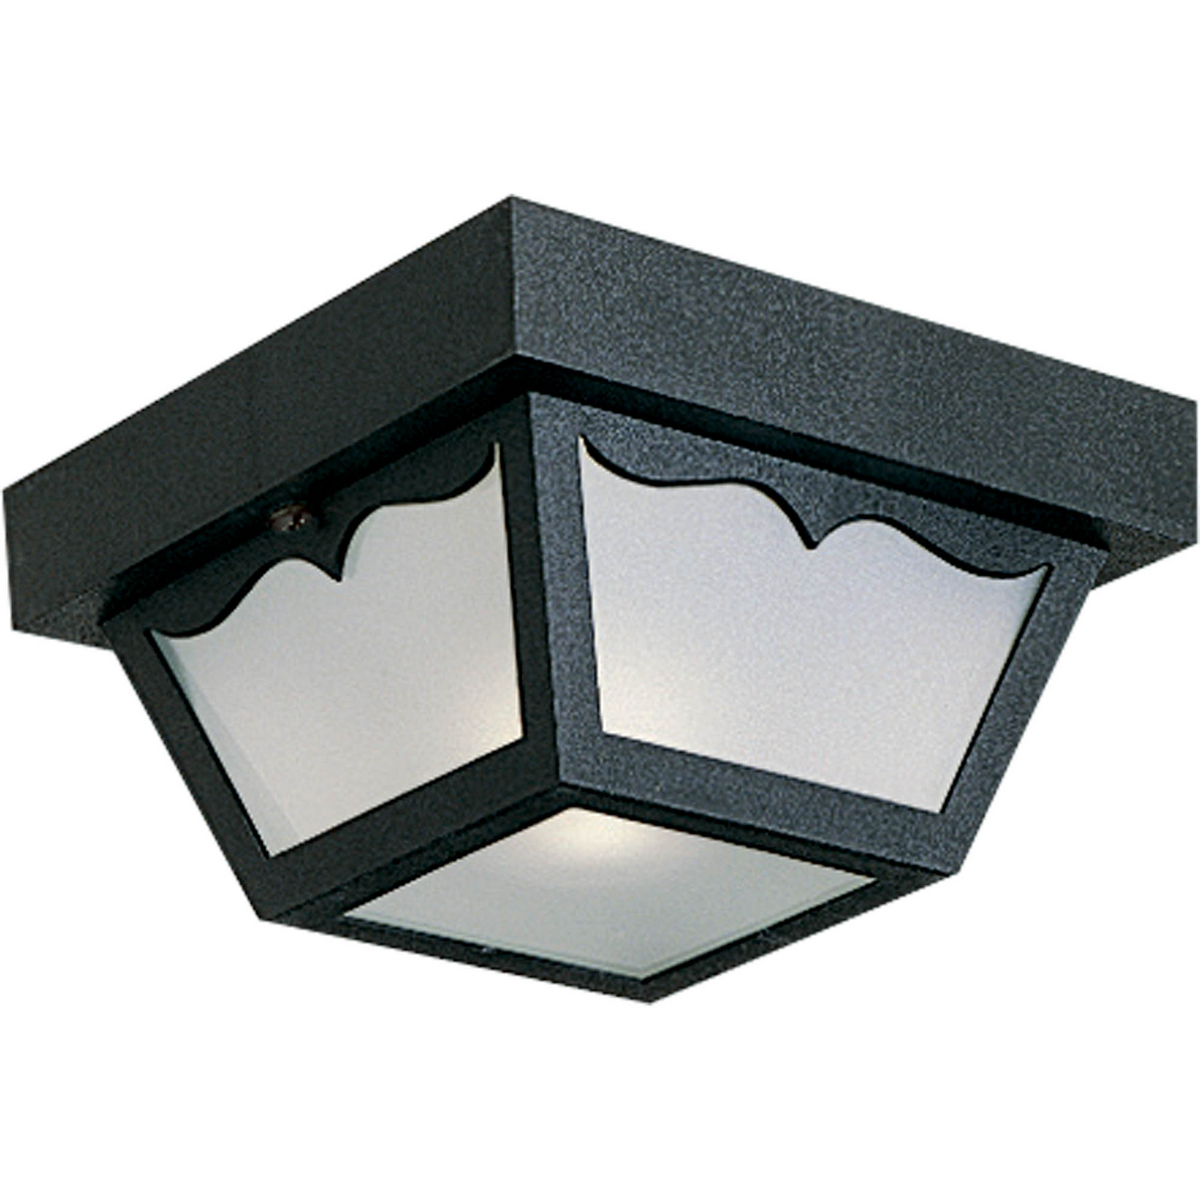 One-Light 8-1/4" Flush Mount for Indoor/Outdoor use - image 1 of 2